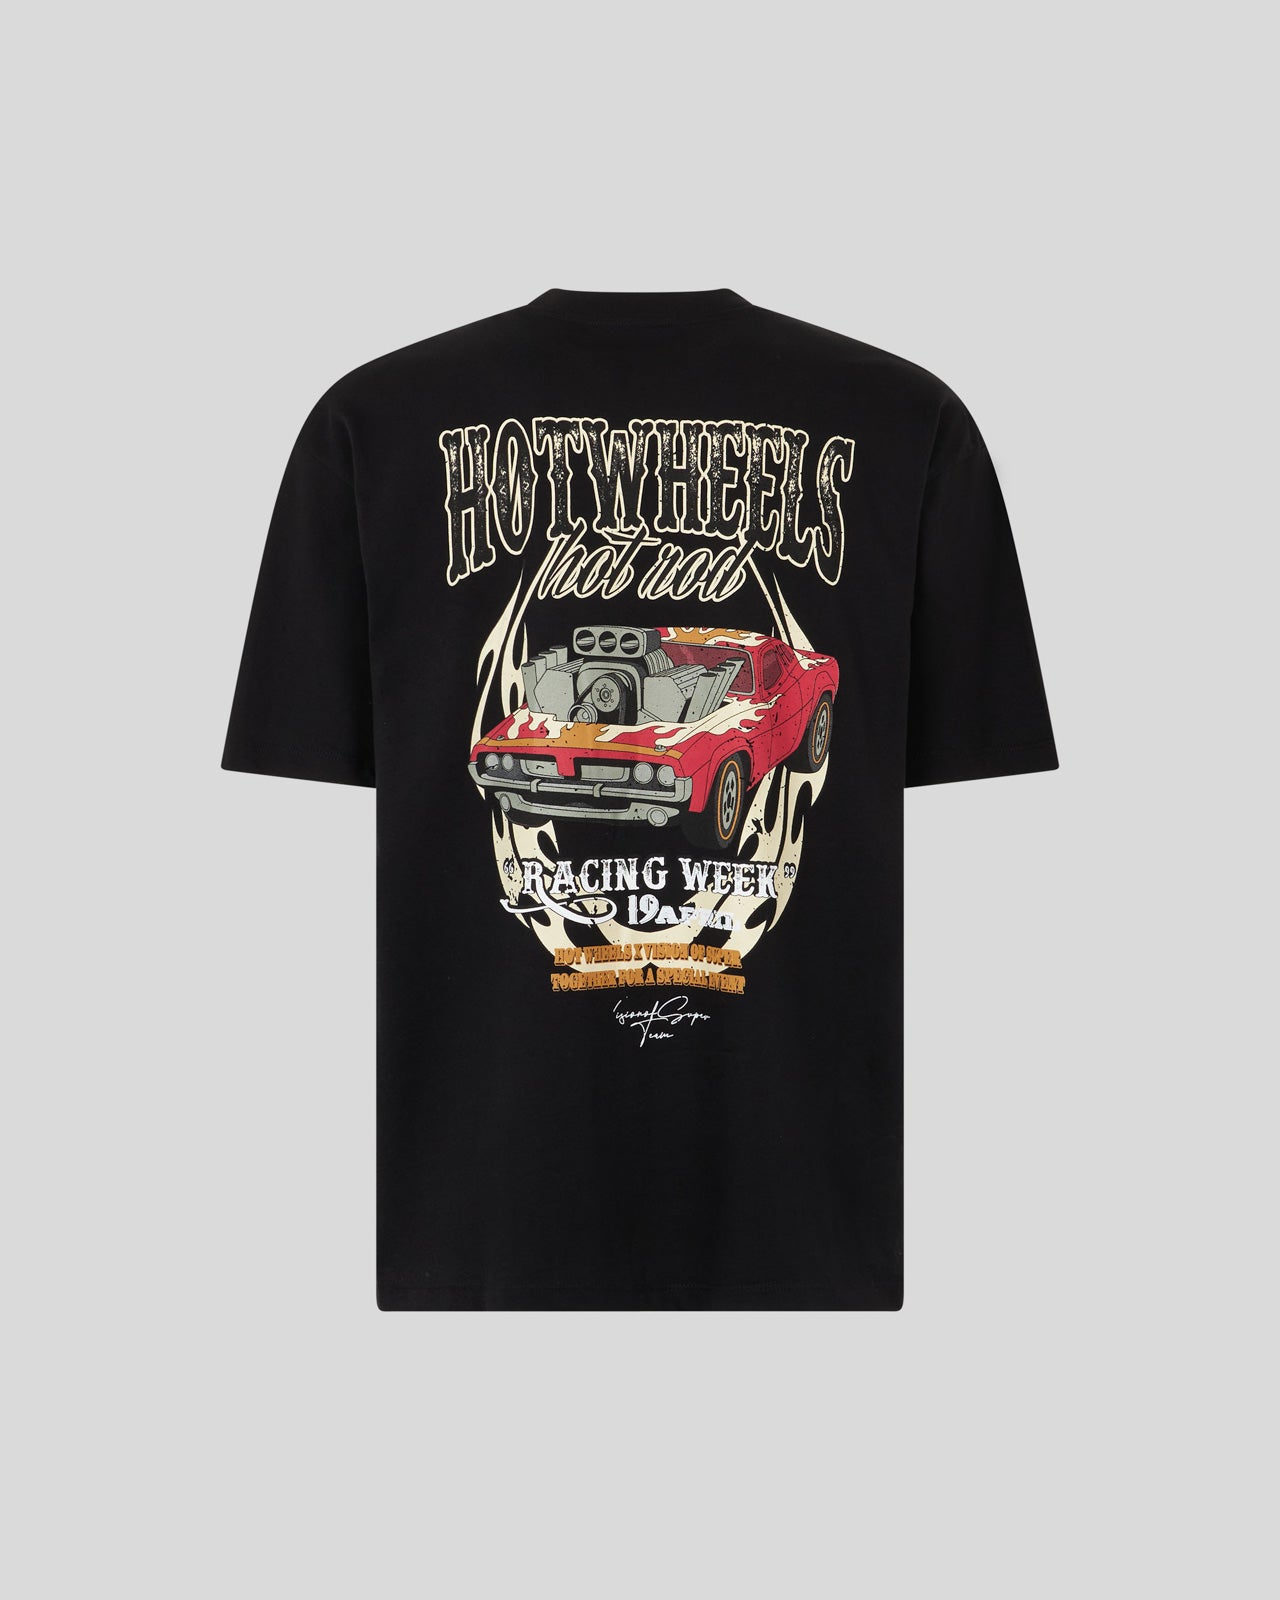 BLACK T-SHIRT WITH RED CAR PRINT